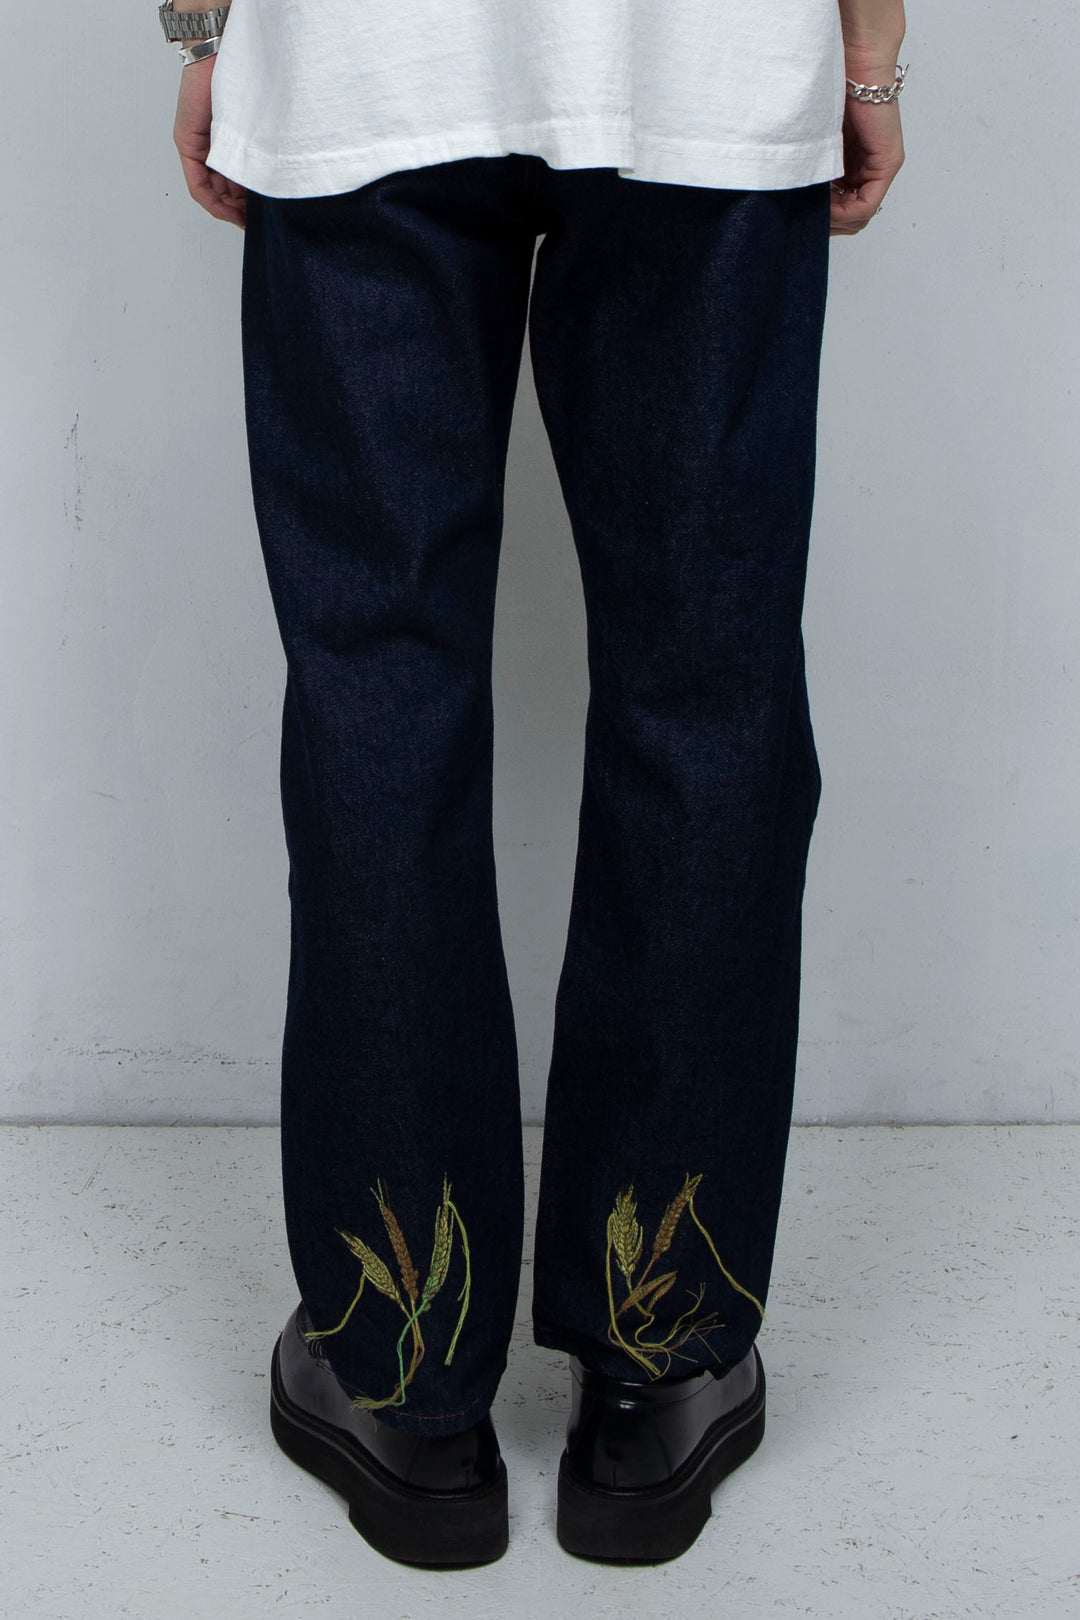 "JUDE" WITH WHEAT Stndard by 80s Reproduced Denim ONEWASH